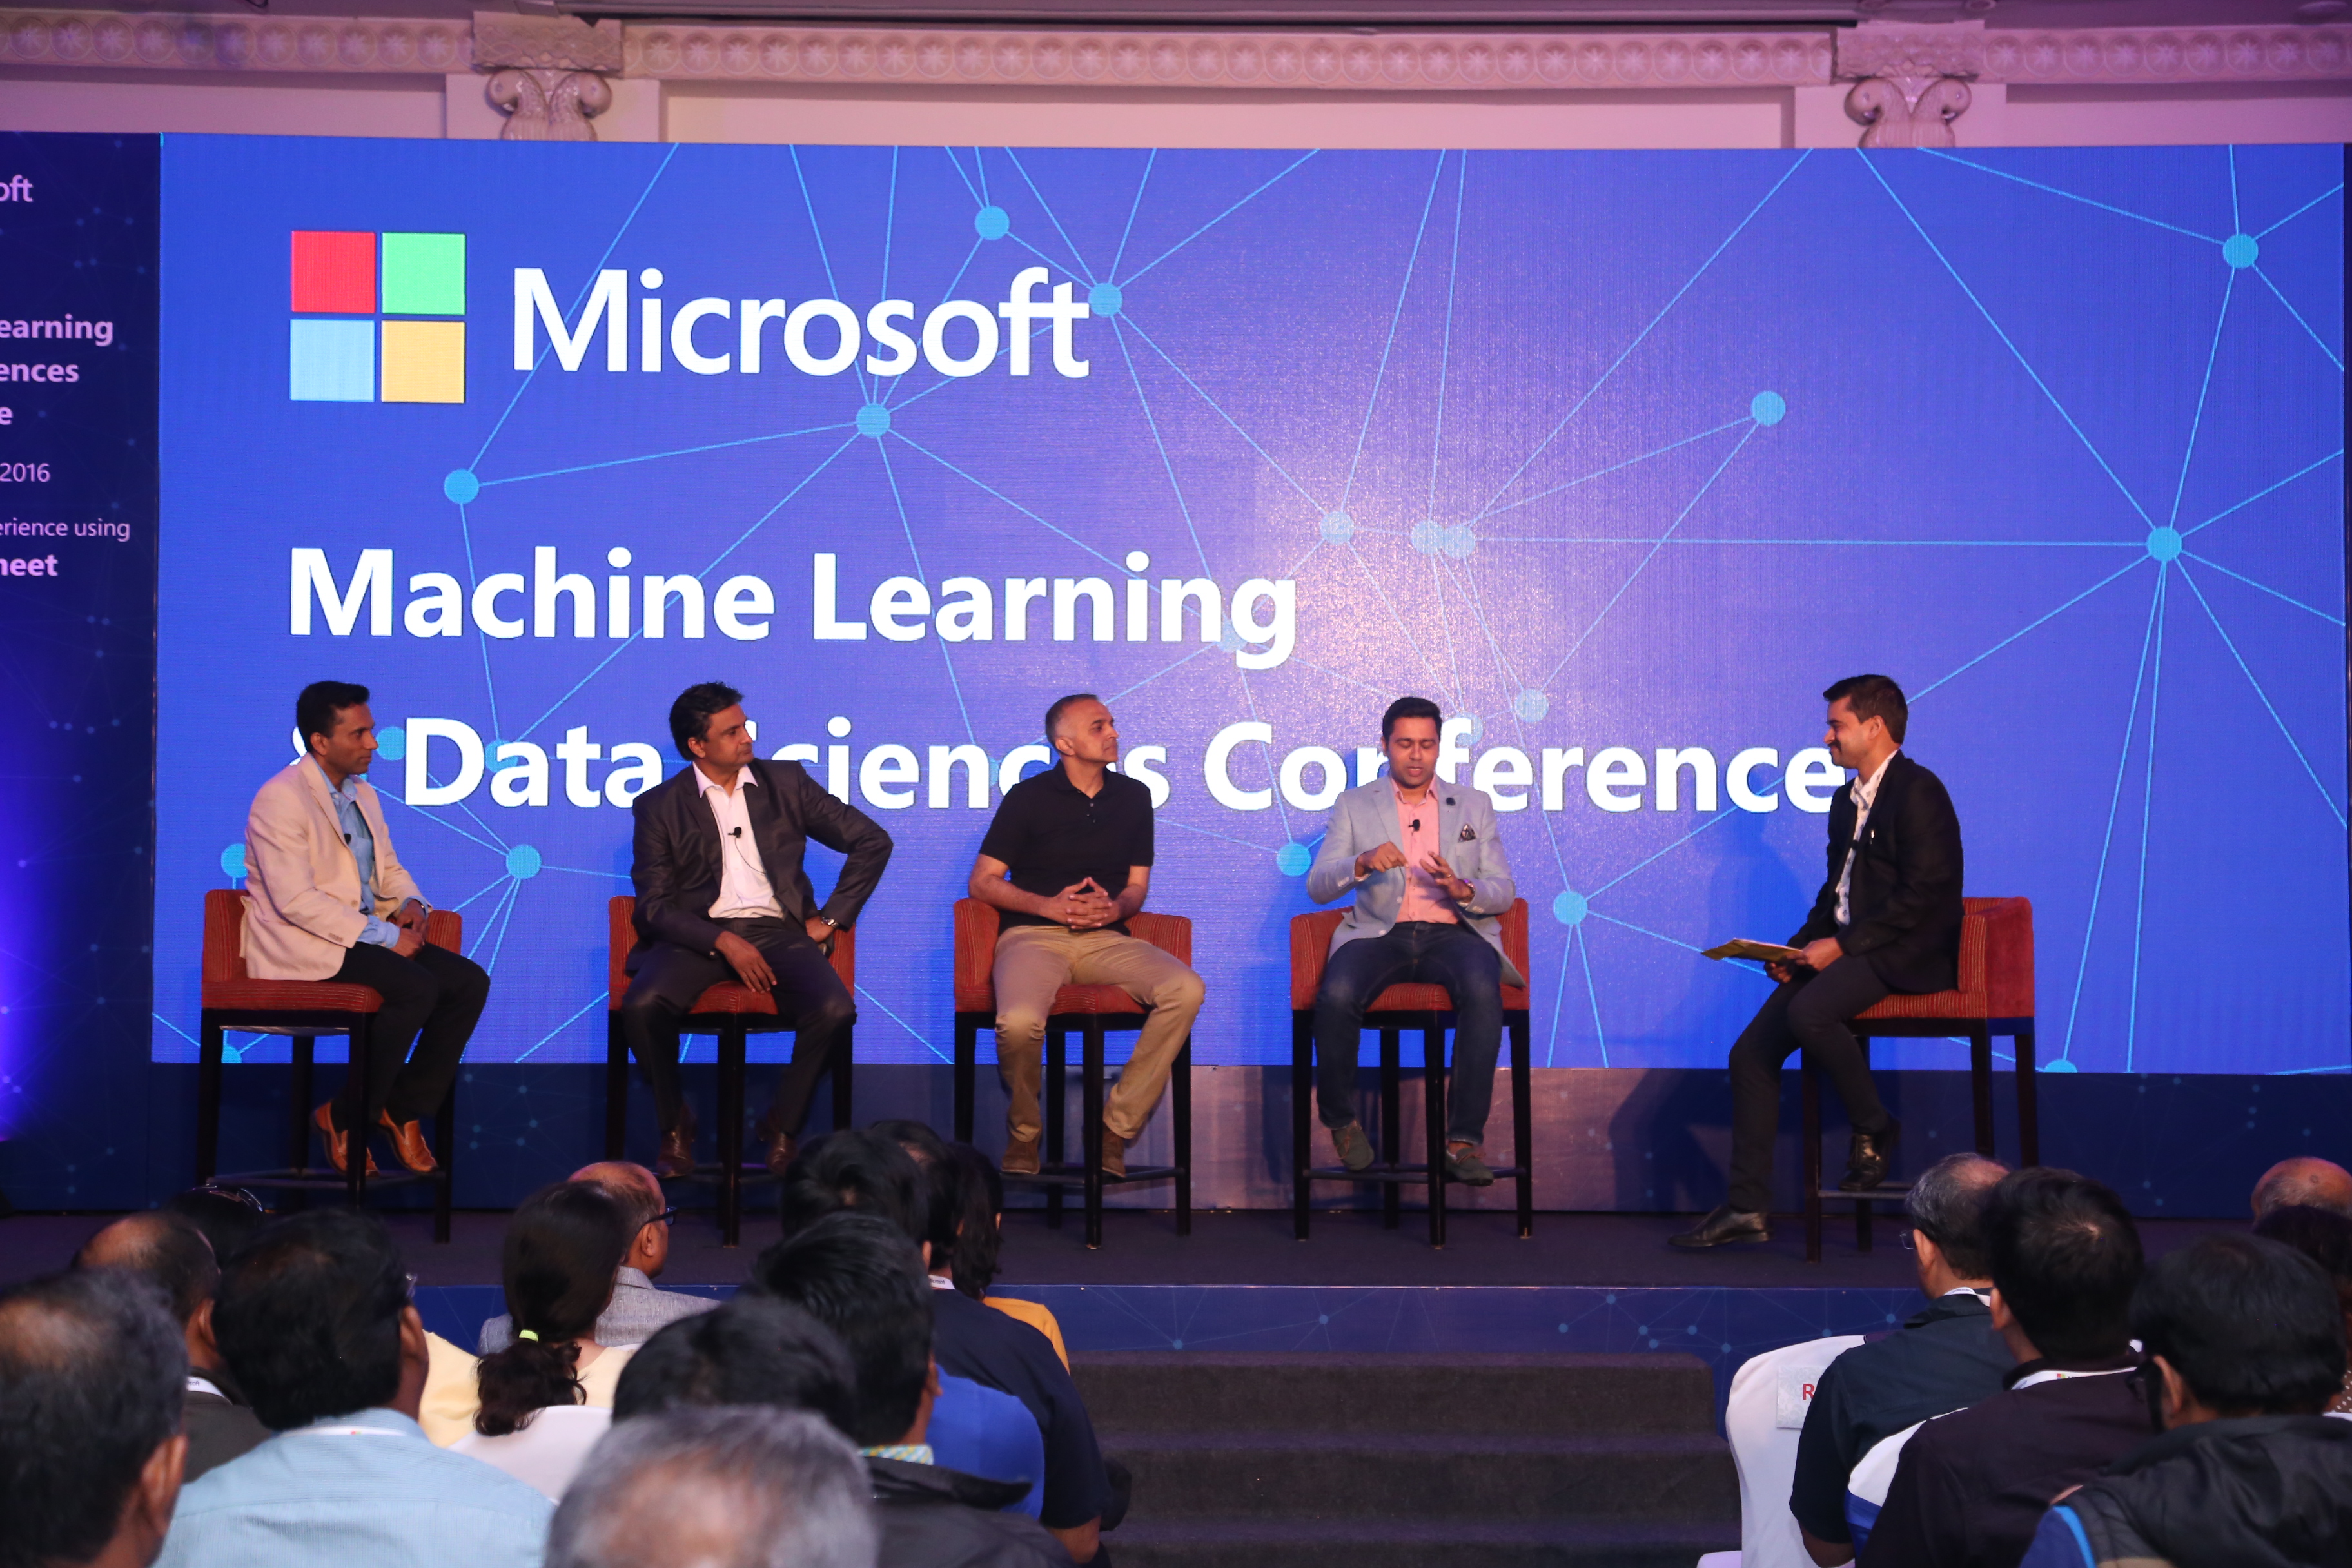 From Right - Shamya Dasgupta - Senior Editor, Wisden India; Aakash Chopra - former Indian cricketer; Meetul Patel - General Manager, Microsoft India; Javagal Srinath - former Indian cricketer and Joseph Sirosh - Corporate Vice President - Data Group, Microsoft at the Microsoft Showcase for Machine Learning and Data Sciences in Sports at Bengaluru. The showcase discussed the growing impact of technology on sports and the role Microsoft's Machine Learning can play in accurately calculating target scores in weather-interrupted T20 cricket matches. It also discussed  possibilities of how Machine Learning can transform sports management and administration including monitoring health condition on the field, predicting injuries and taking pre-emptive action.